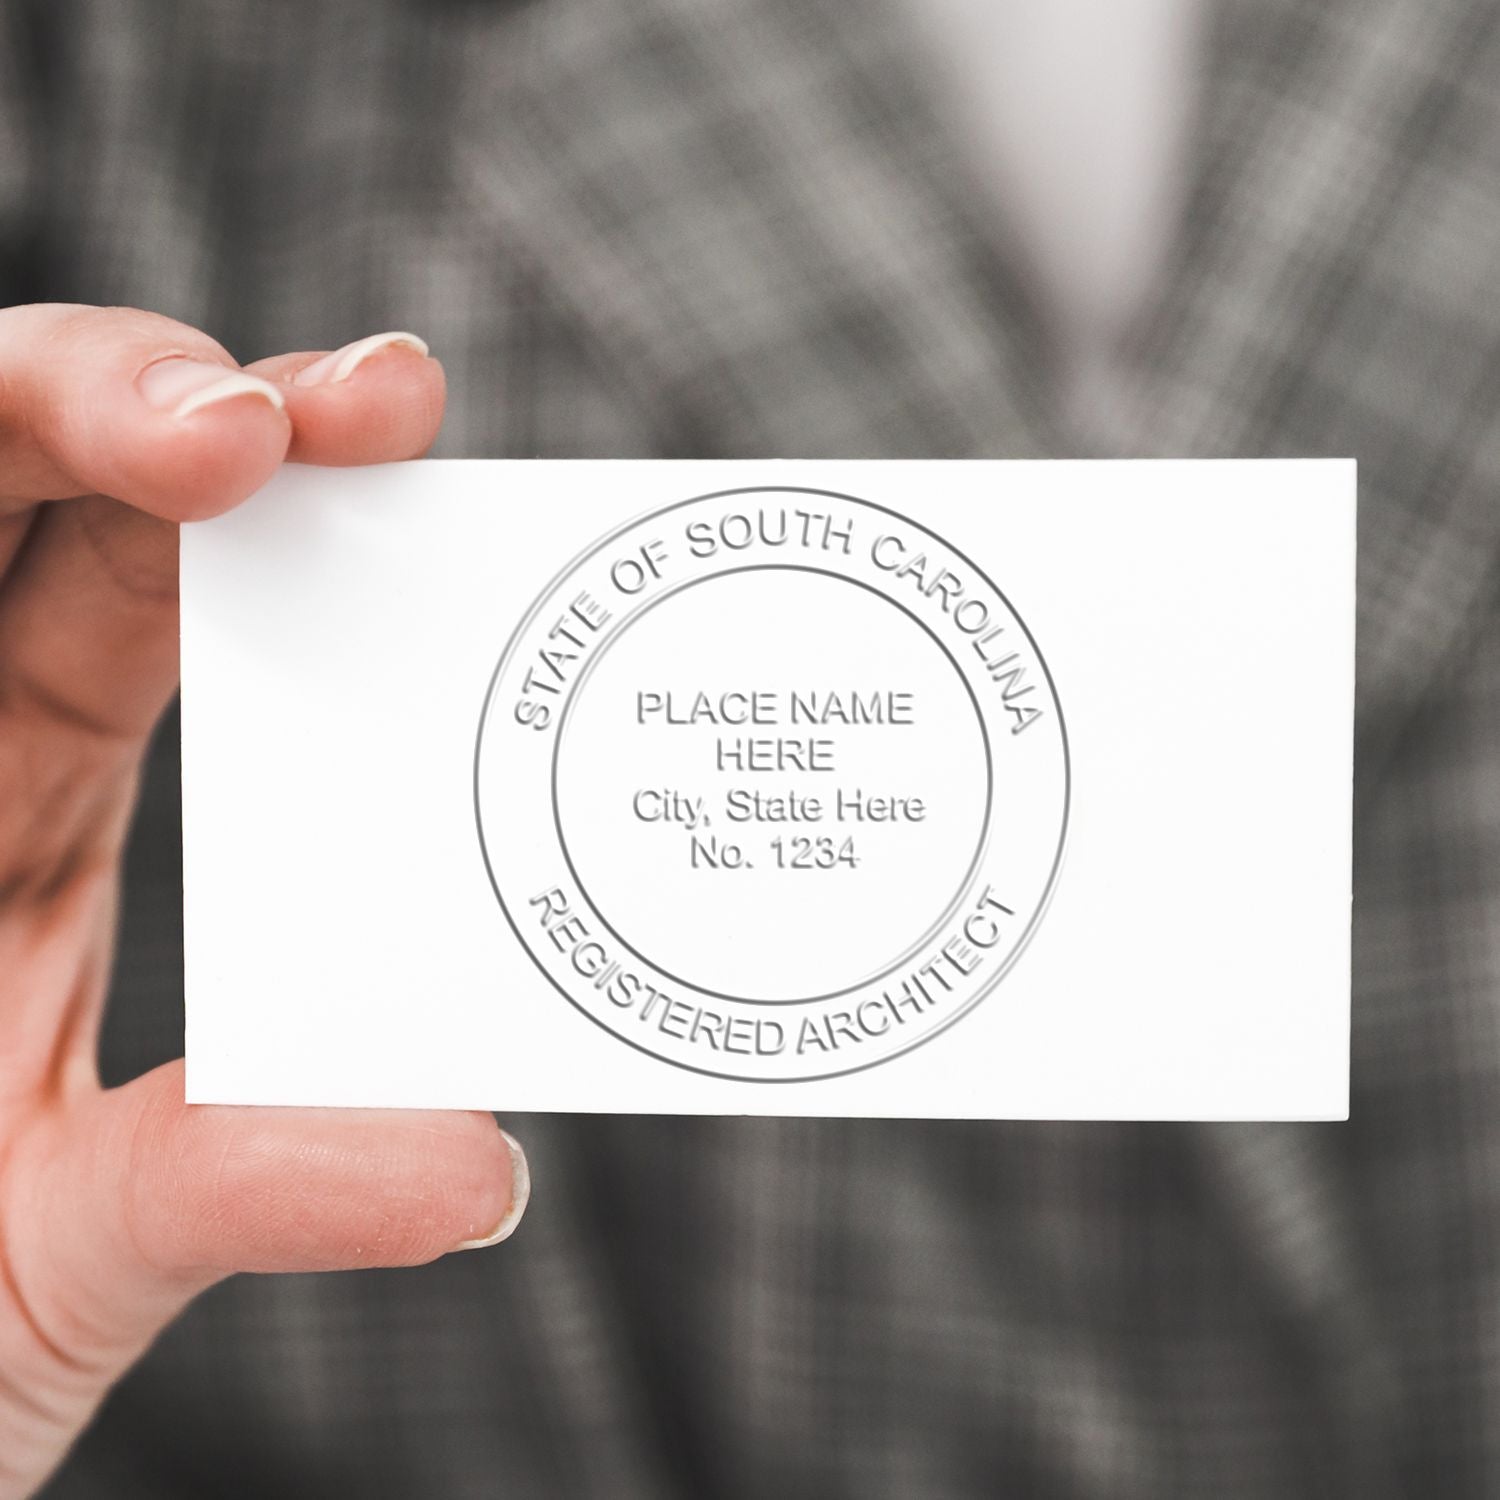 South Carolina Architectural Seal Stamps